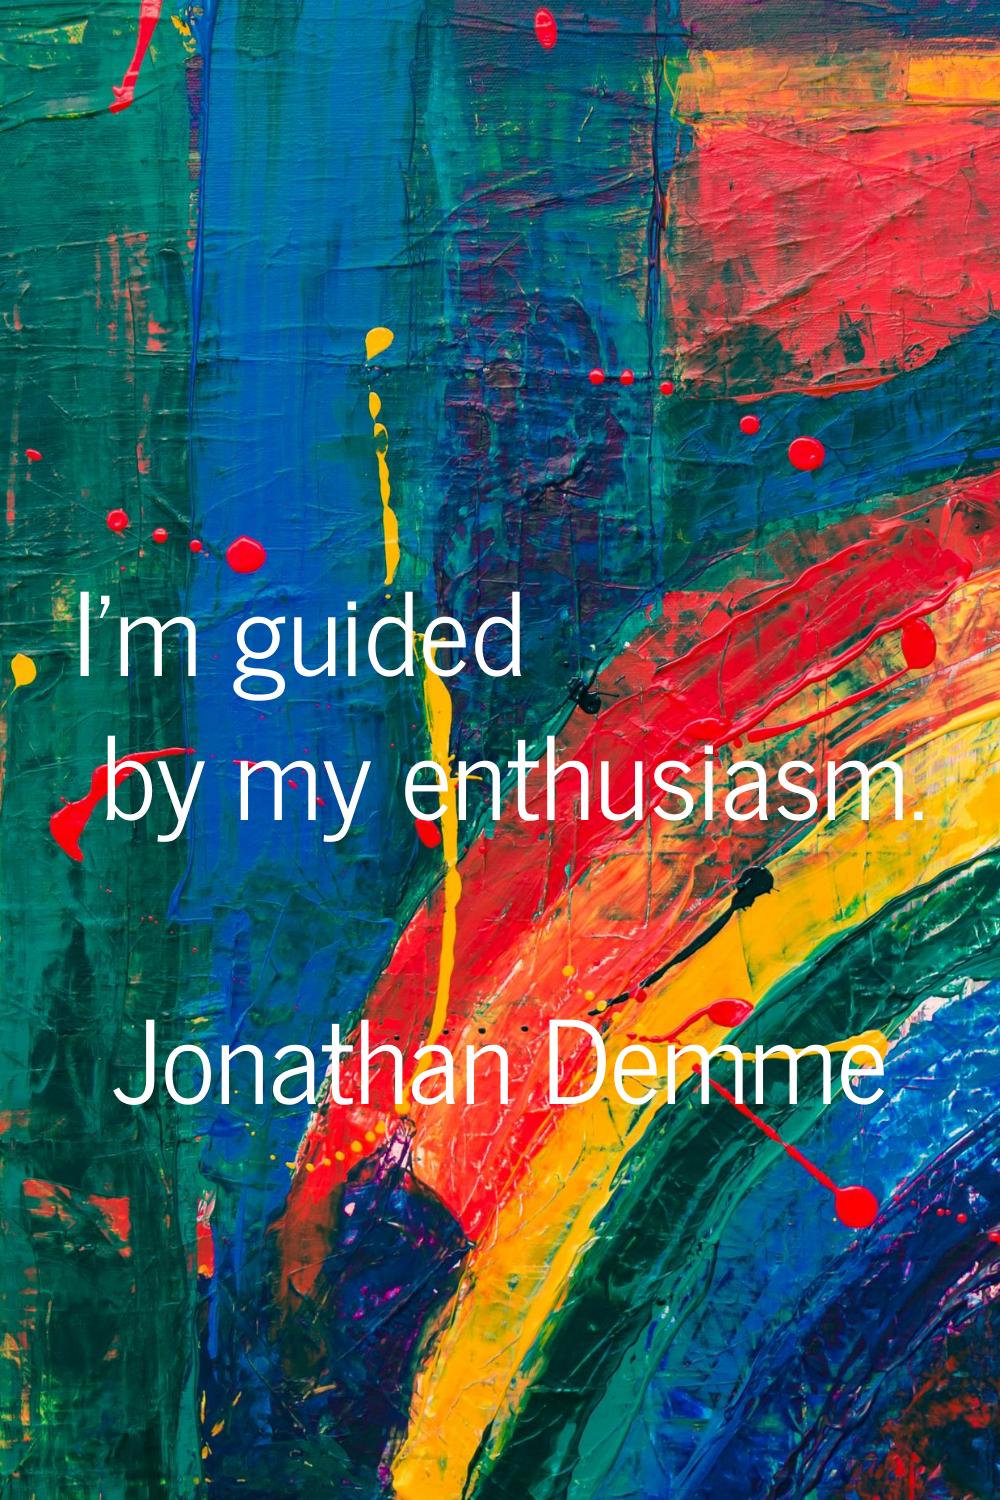 I'm guided by my enthusiasm.